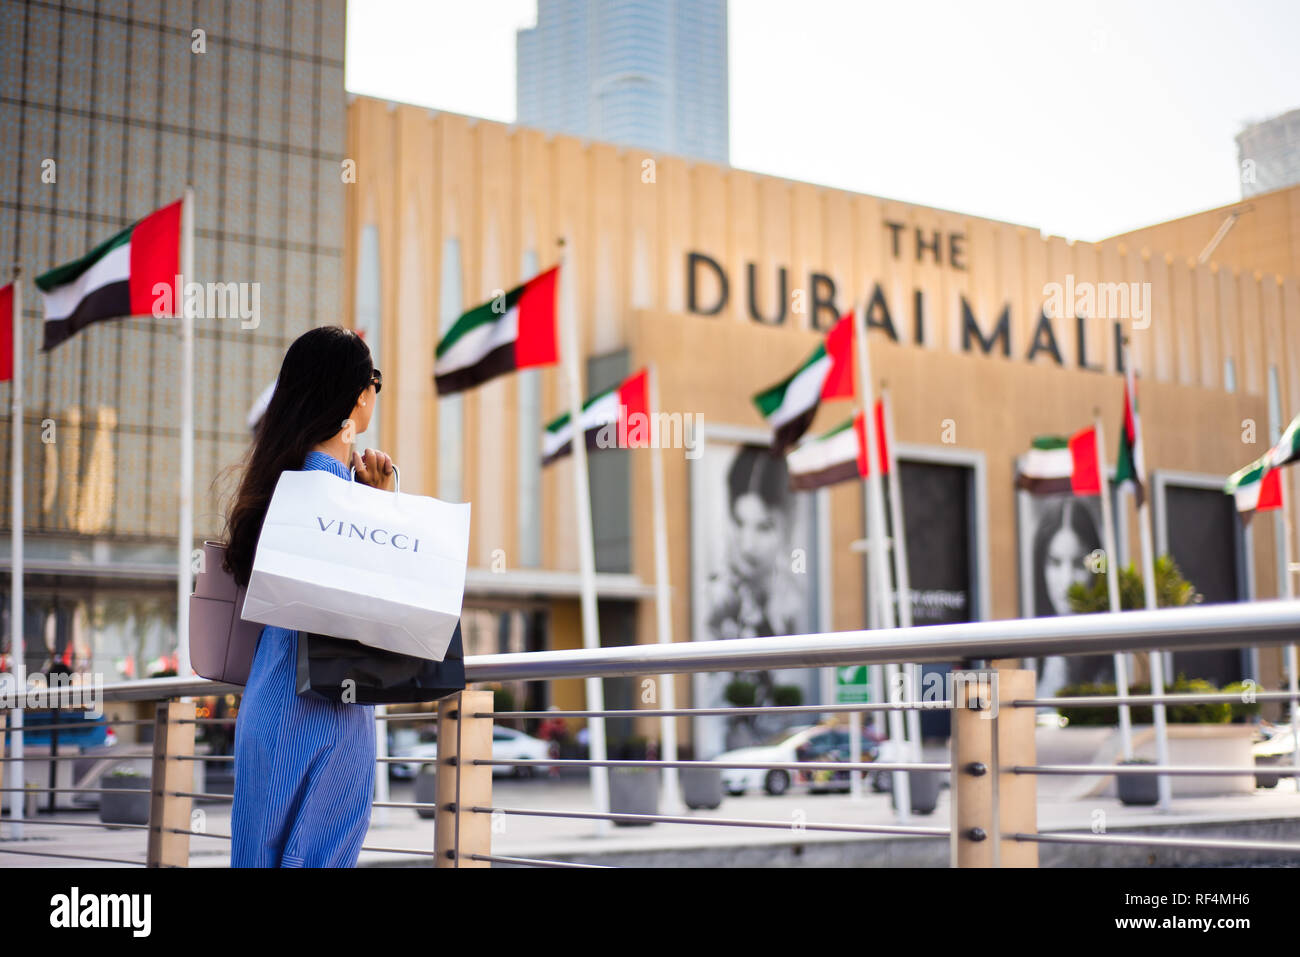 Dubai, United Arab Emirates - March 26, 2018: Asian tourist in front of Dubai mall main entrance with shopping bags Stock Photo